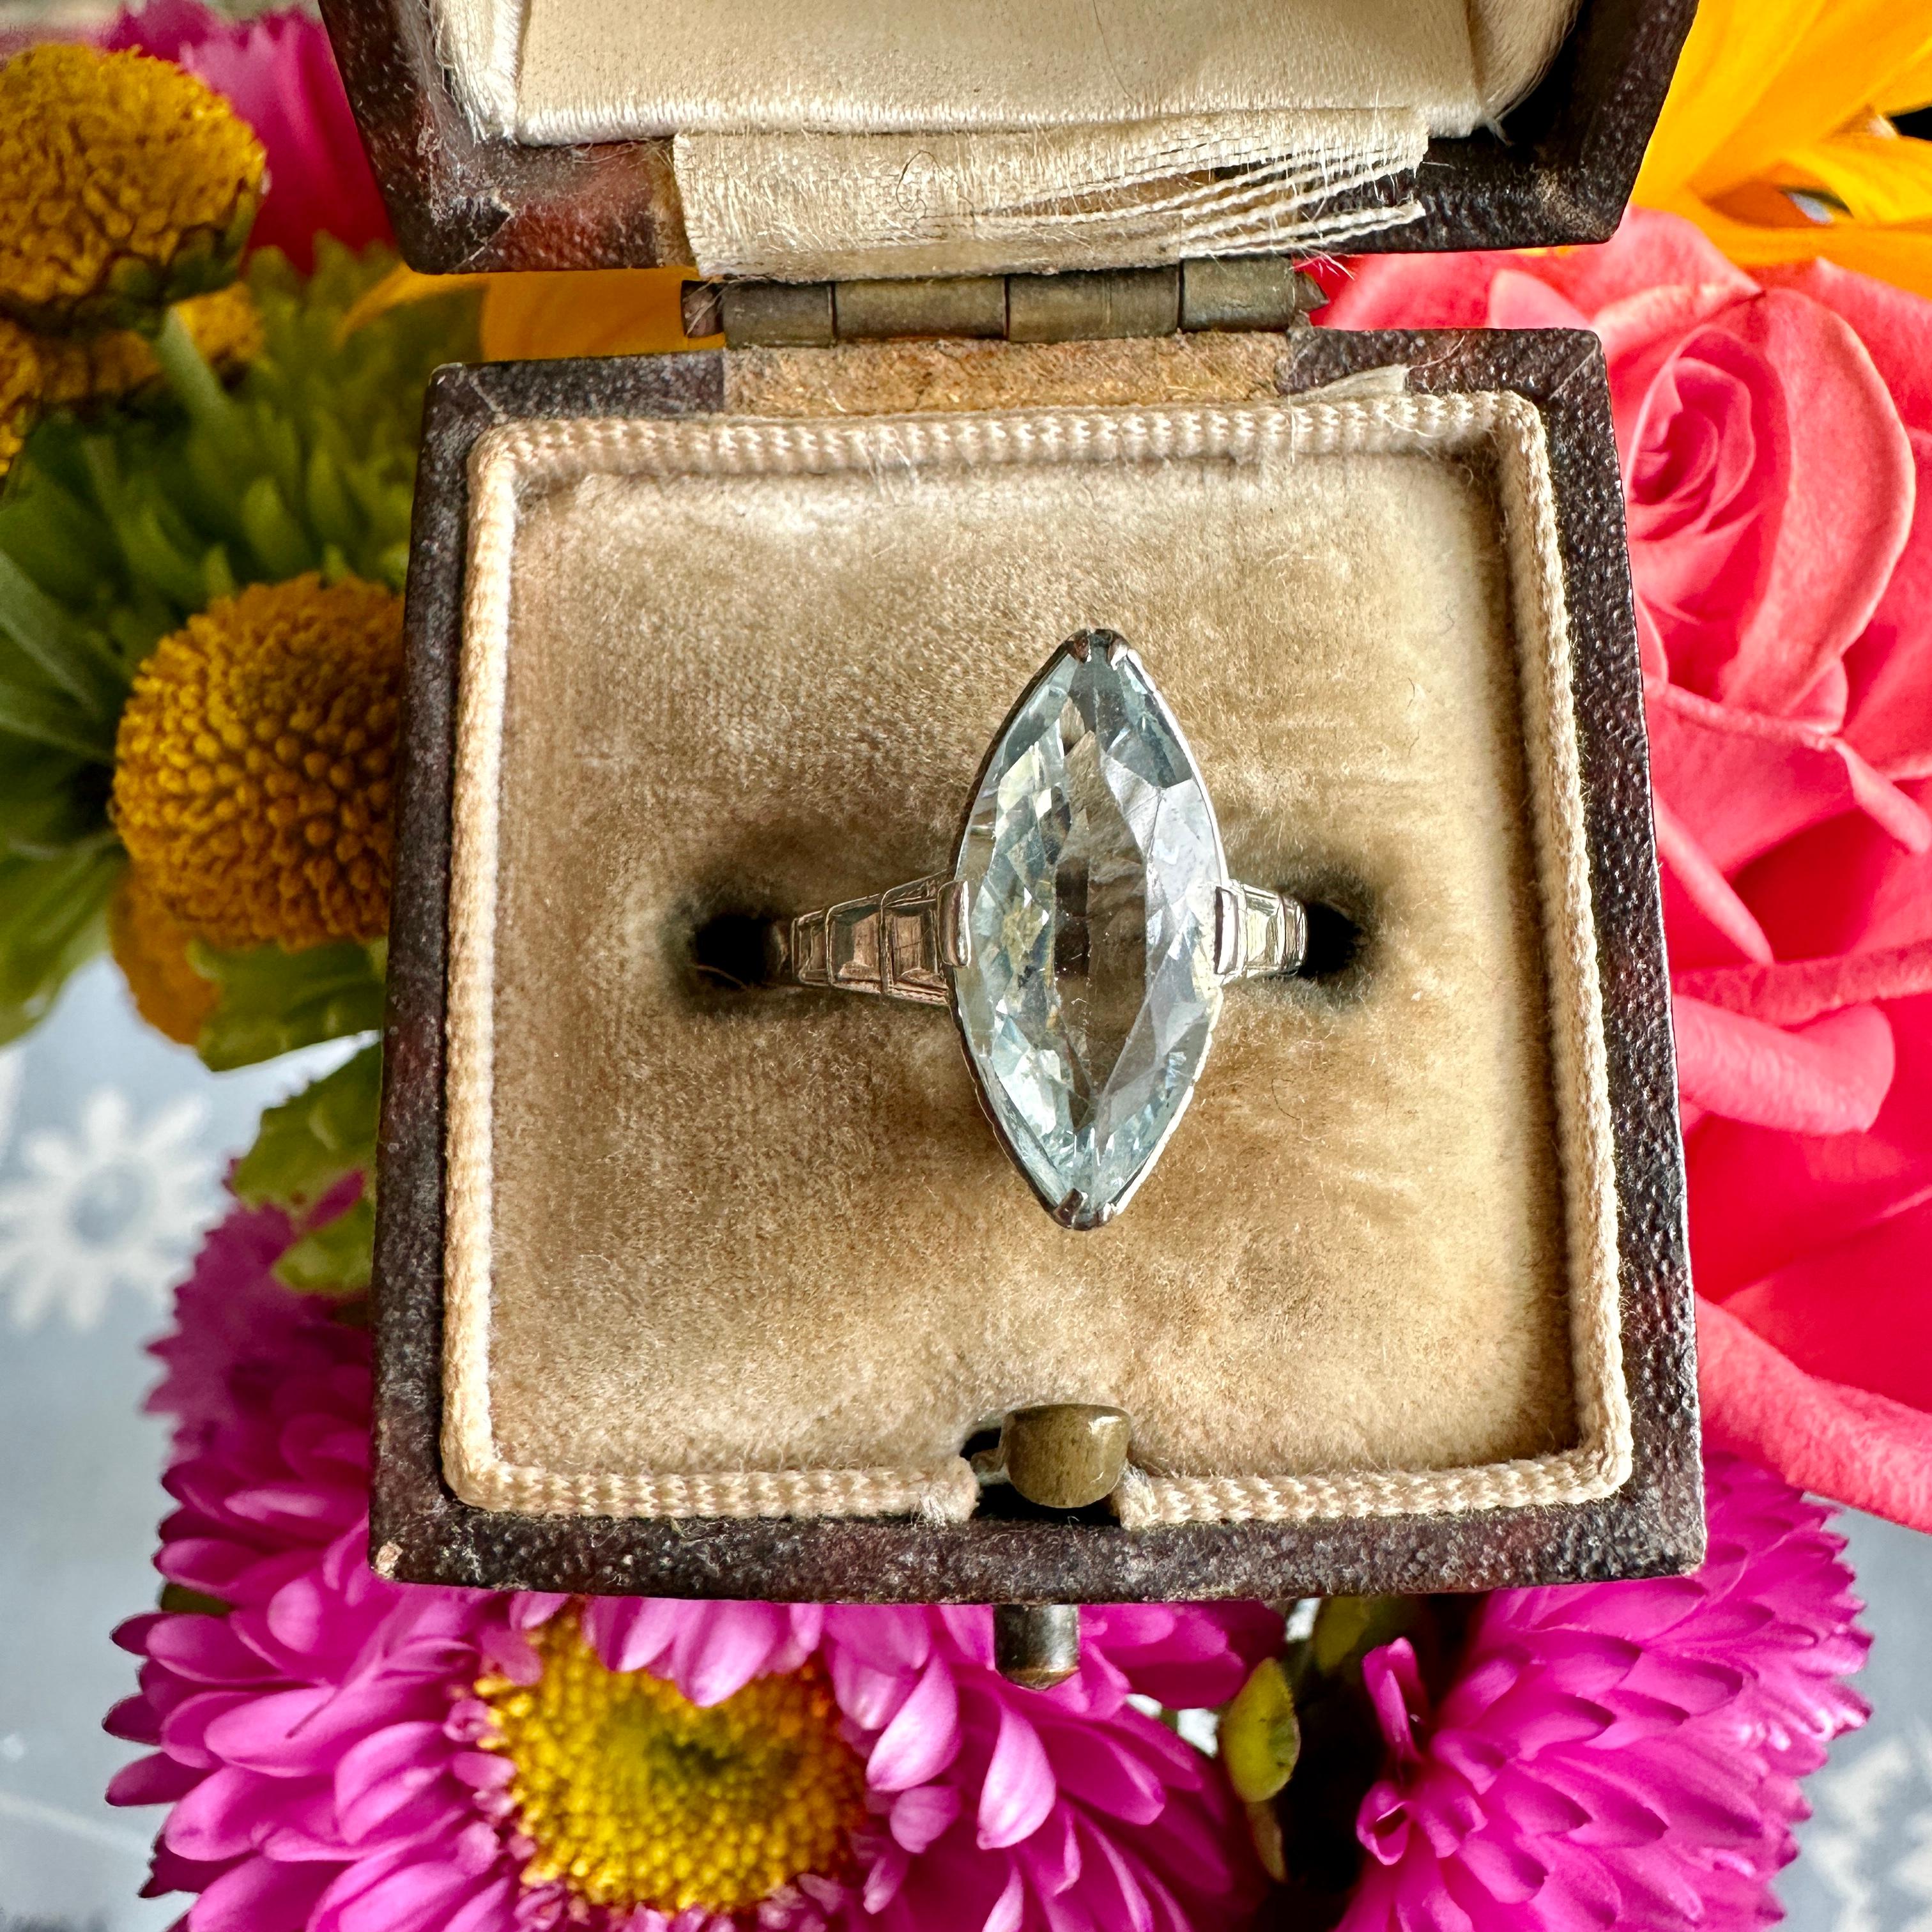 Details:
A very sweet Art Deco period marquise cut ring! Beautiful and feminine, this 14K white gold Art Deco period aquamarine ring would be a sweet ring to add to any collection! The shoulders of the ring have faceted engraving, giving the ring